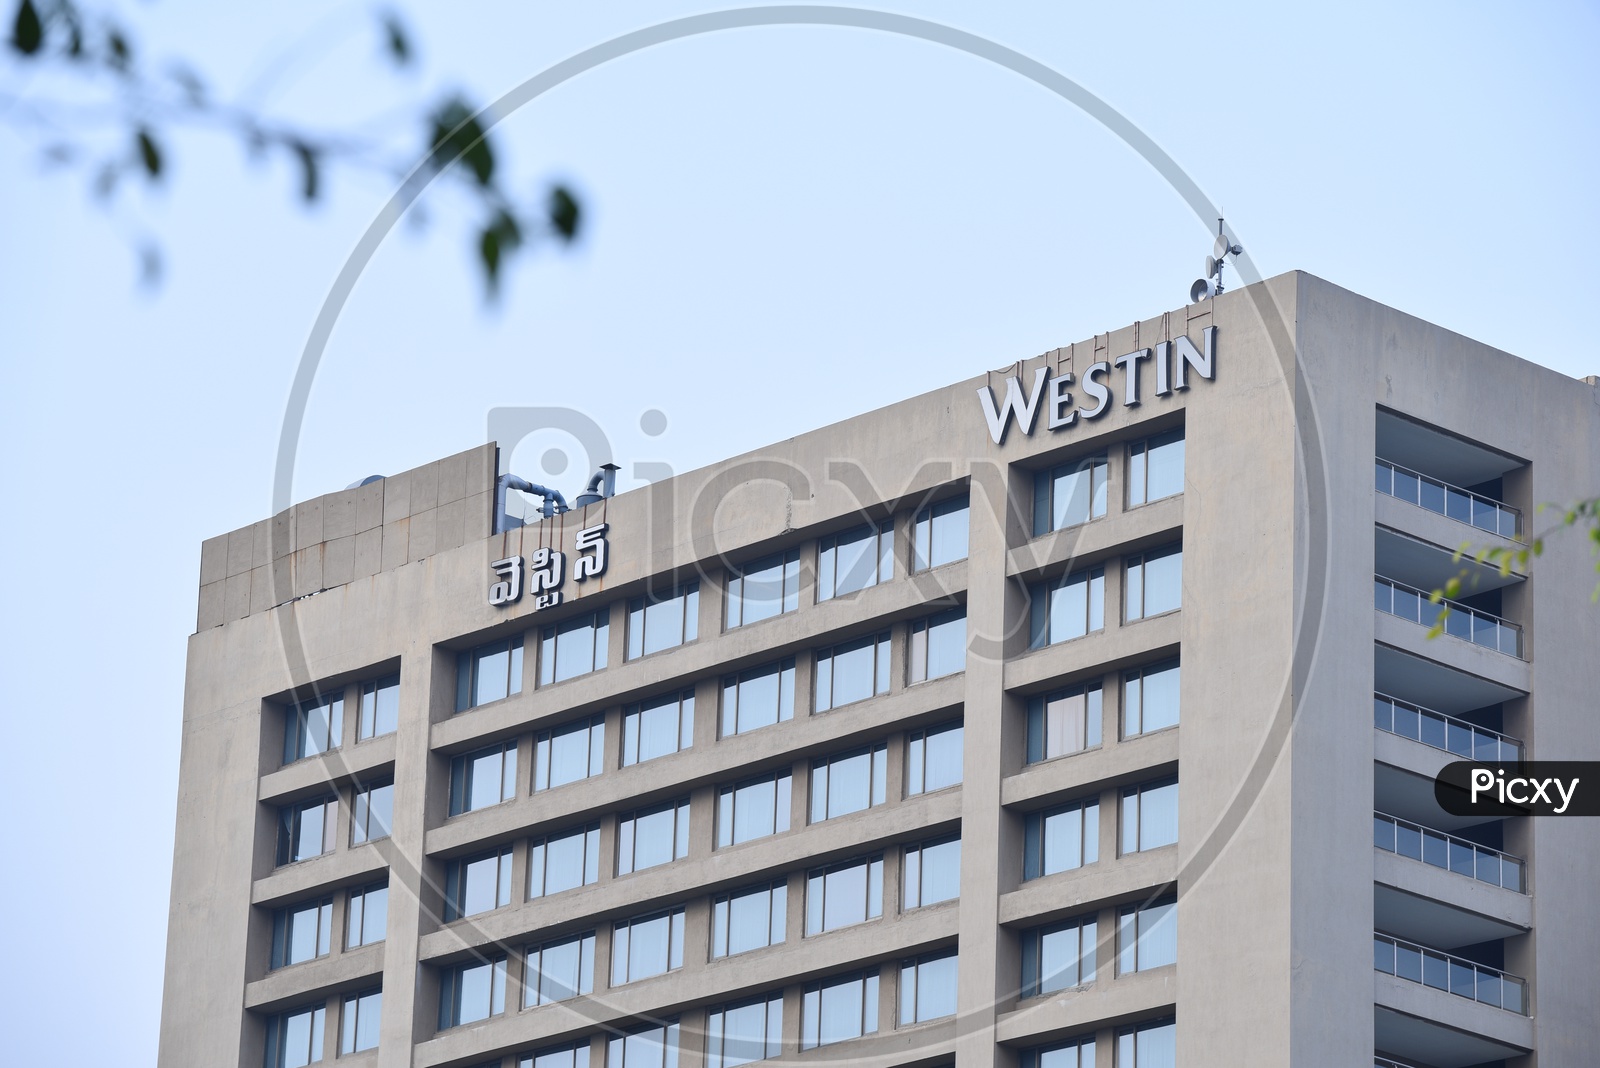 Westin , Name Board On Corporate Building